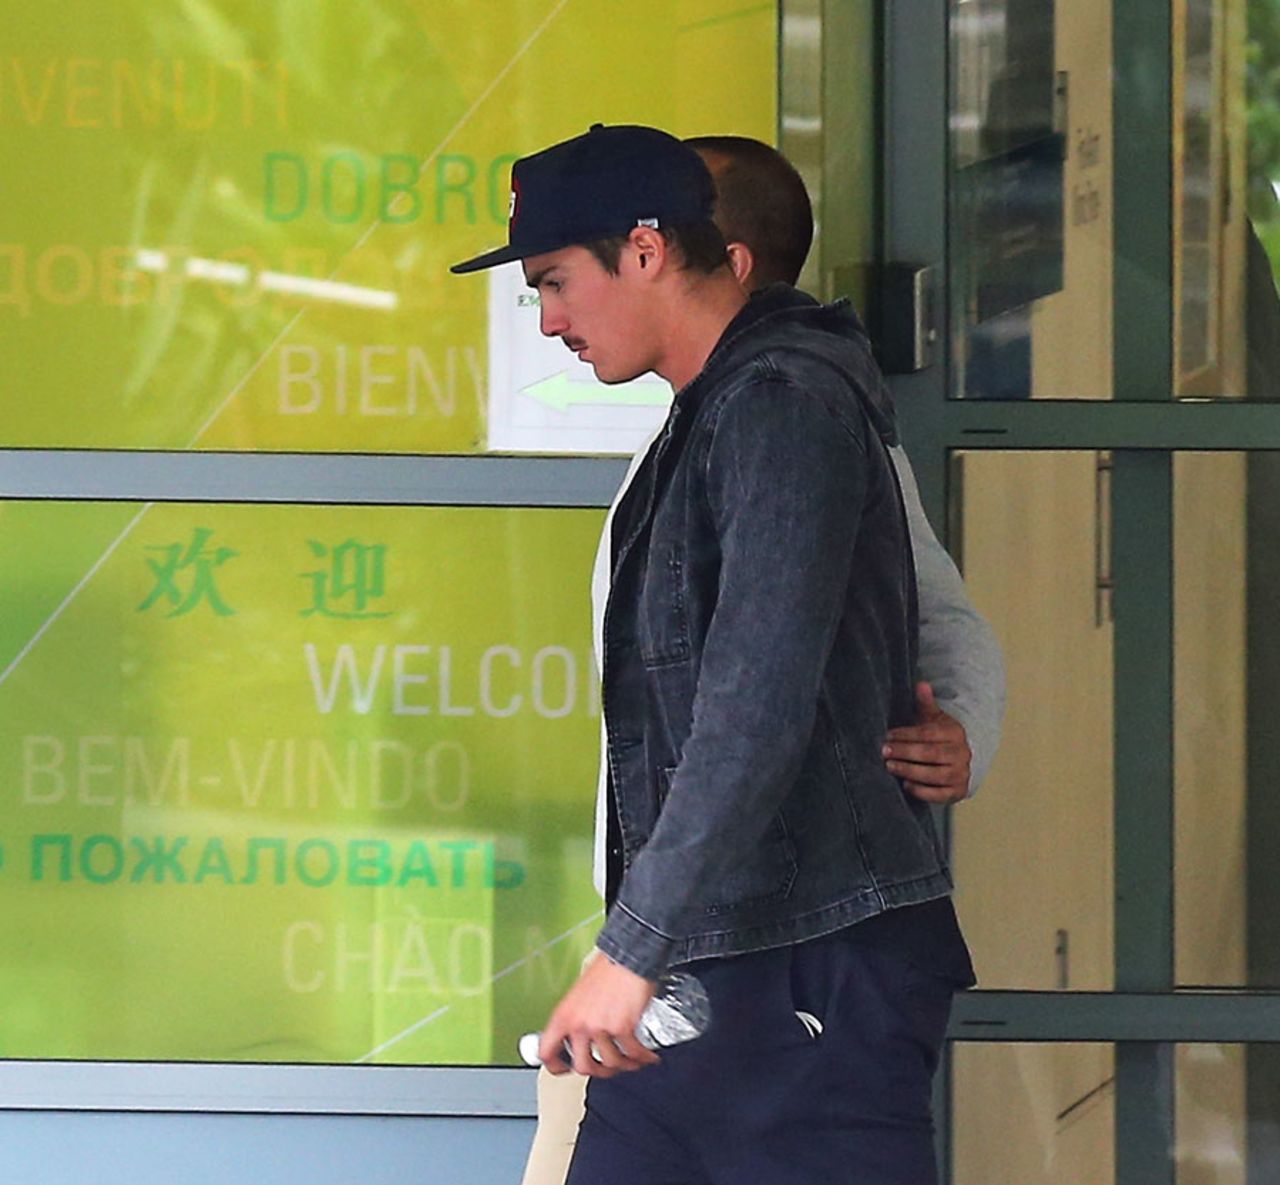 Sean Abbott at St Vincent's Hospital in Sydney, where Phillip Hughes was treated for a head injury, November 27, 2014